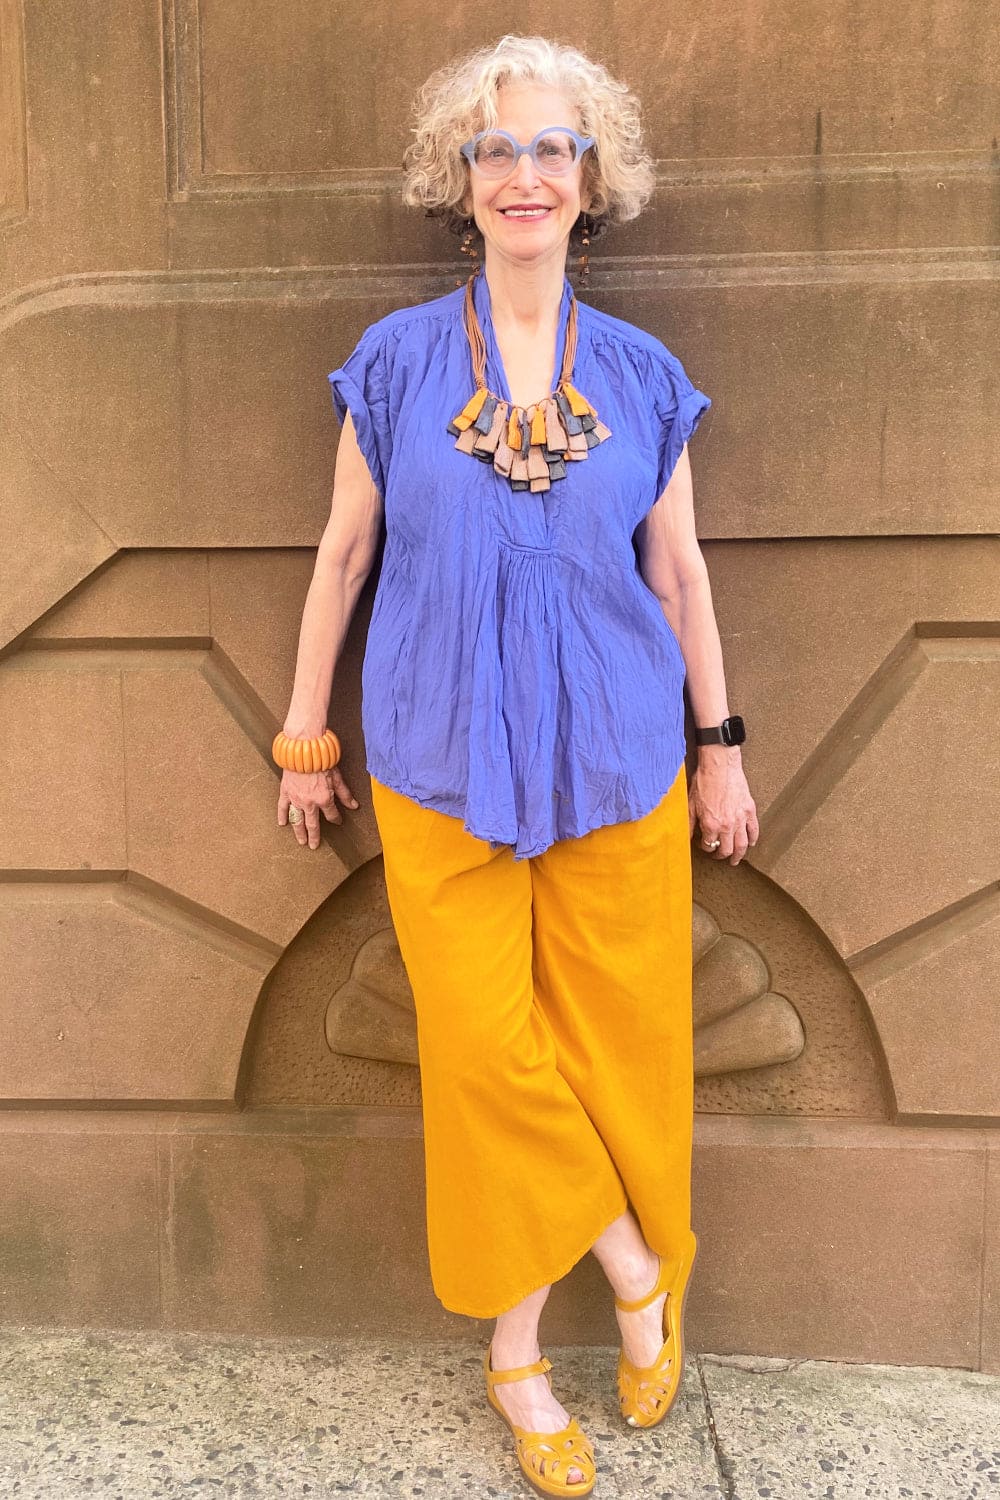 Periwinkle v neck short sleeve cotton women's top worn with tumeric colored full leg pant.